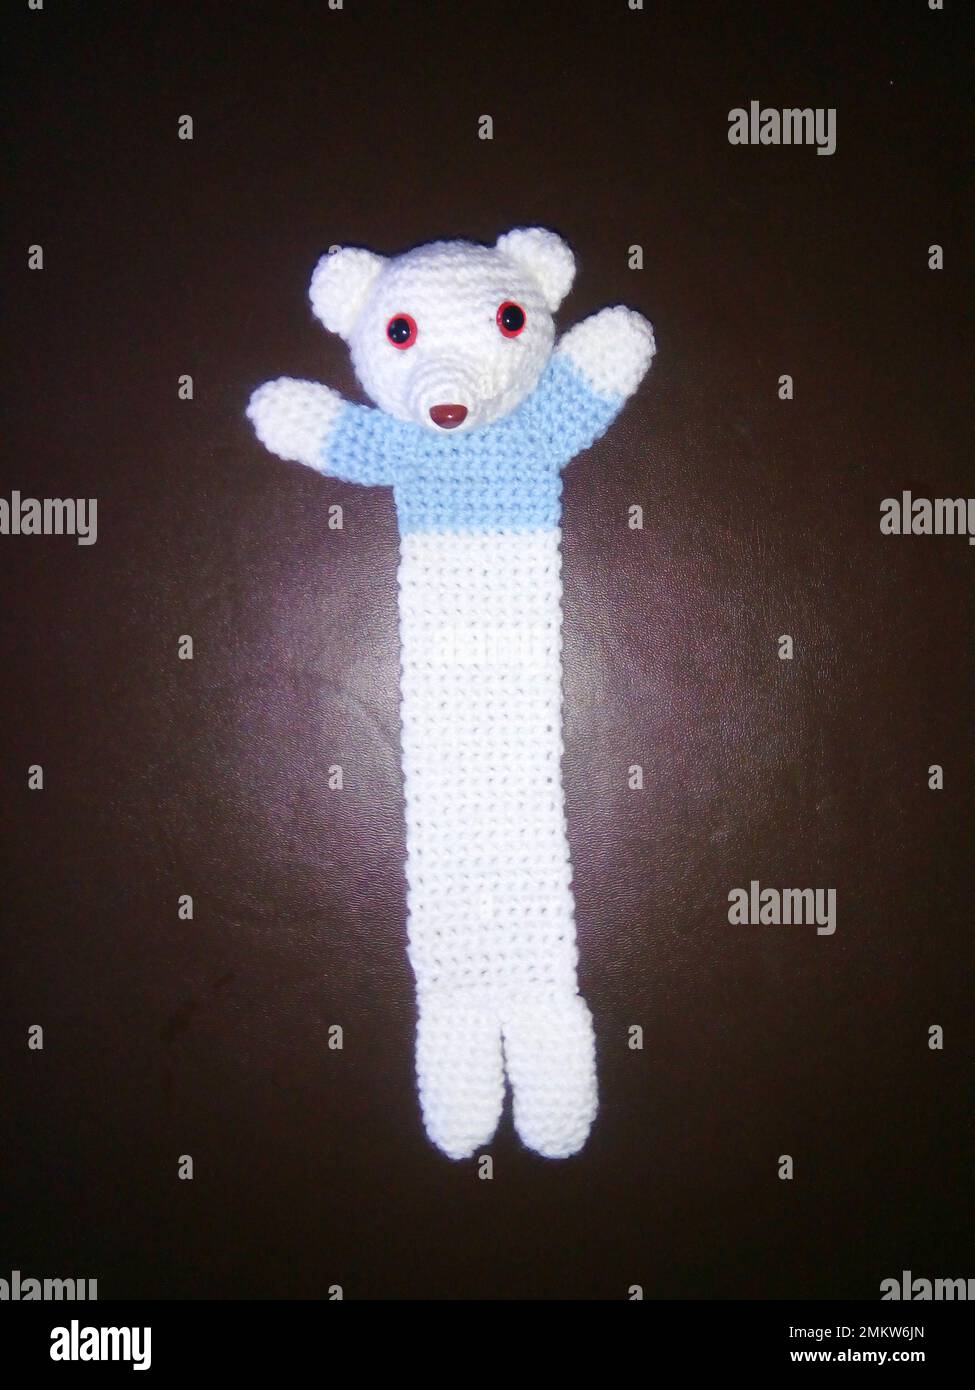 Crocheted teddy bear bookmark wearing a pale blue jumper. Hand made bookmark, arts and crafts. Stock Photo